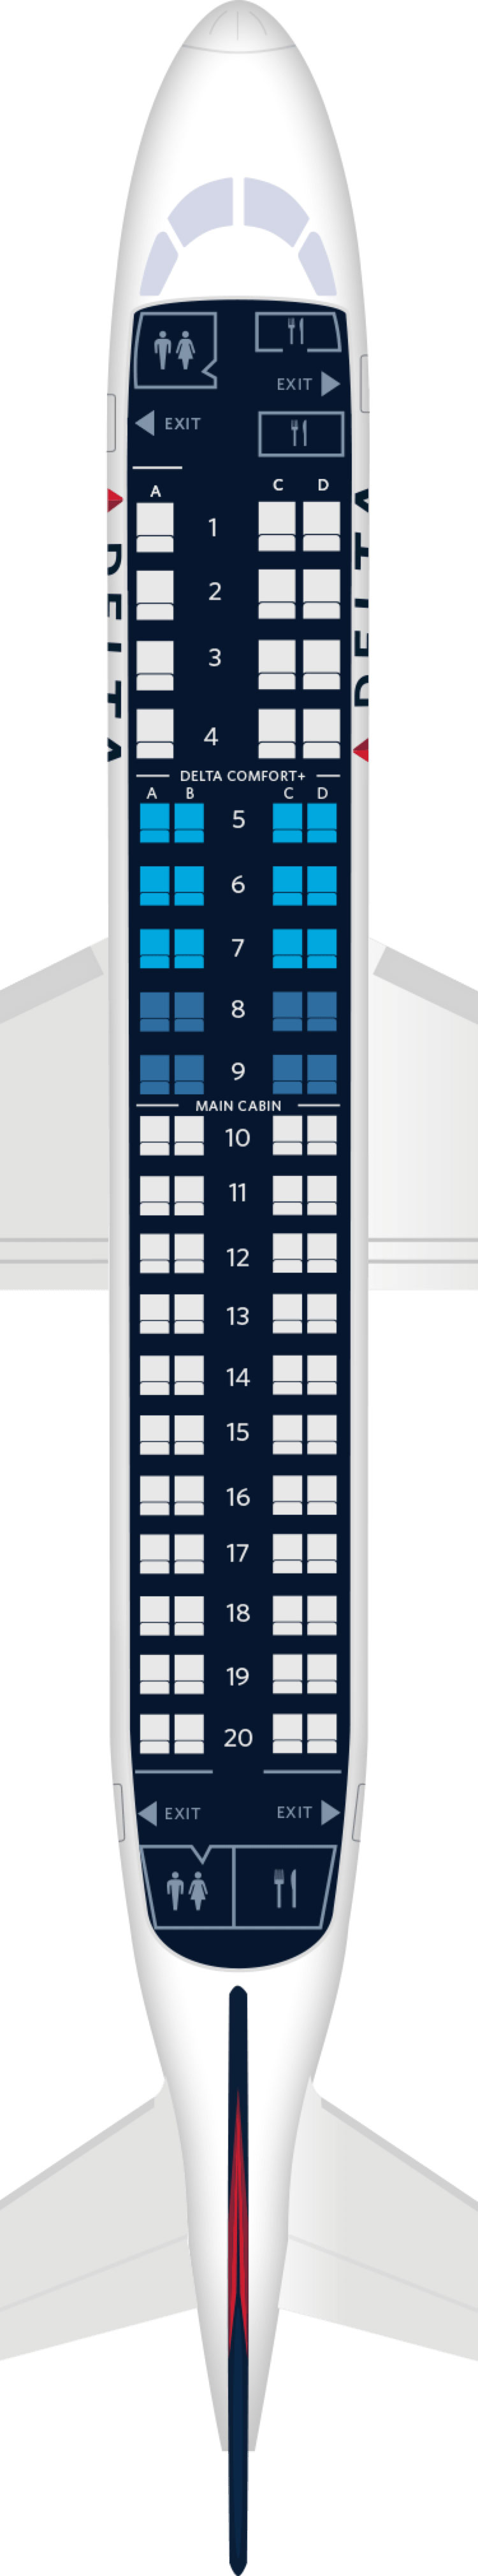 Delta Embraer Emb 175 Jet Seating Chart Review Home Decor